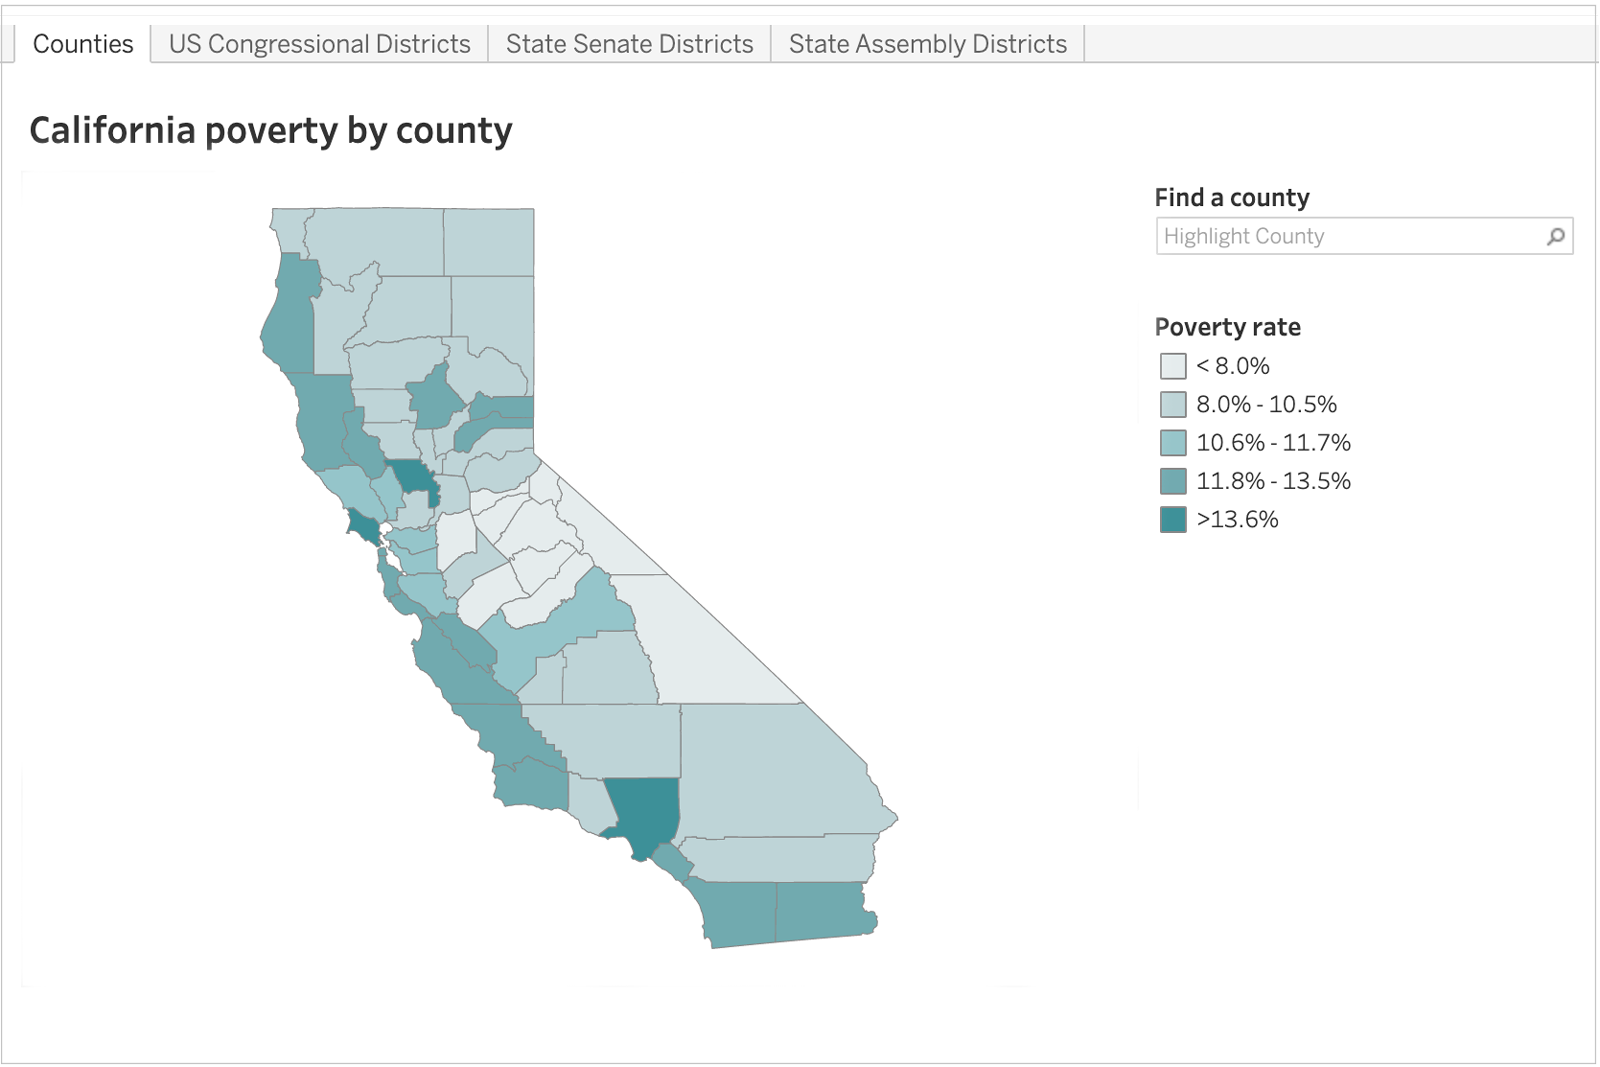 California Poverty by County and Legislative District Public Policy Institute of California